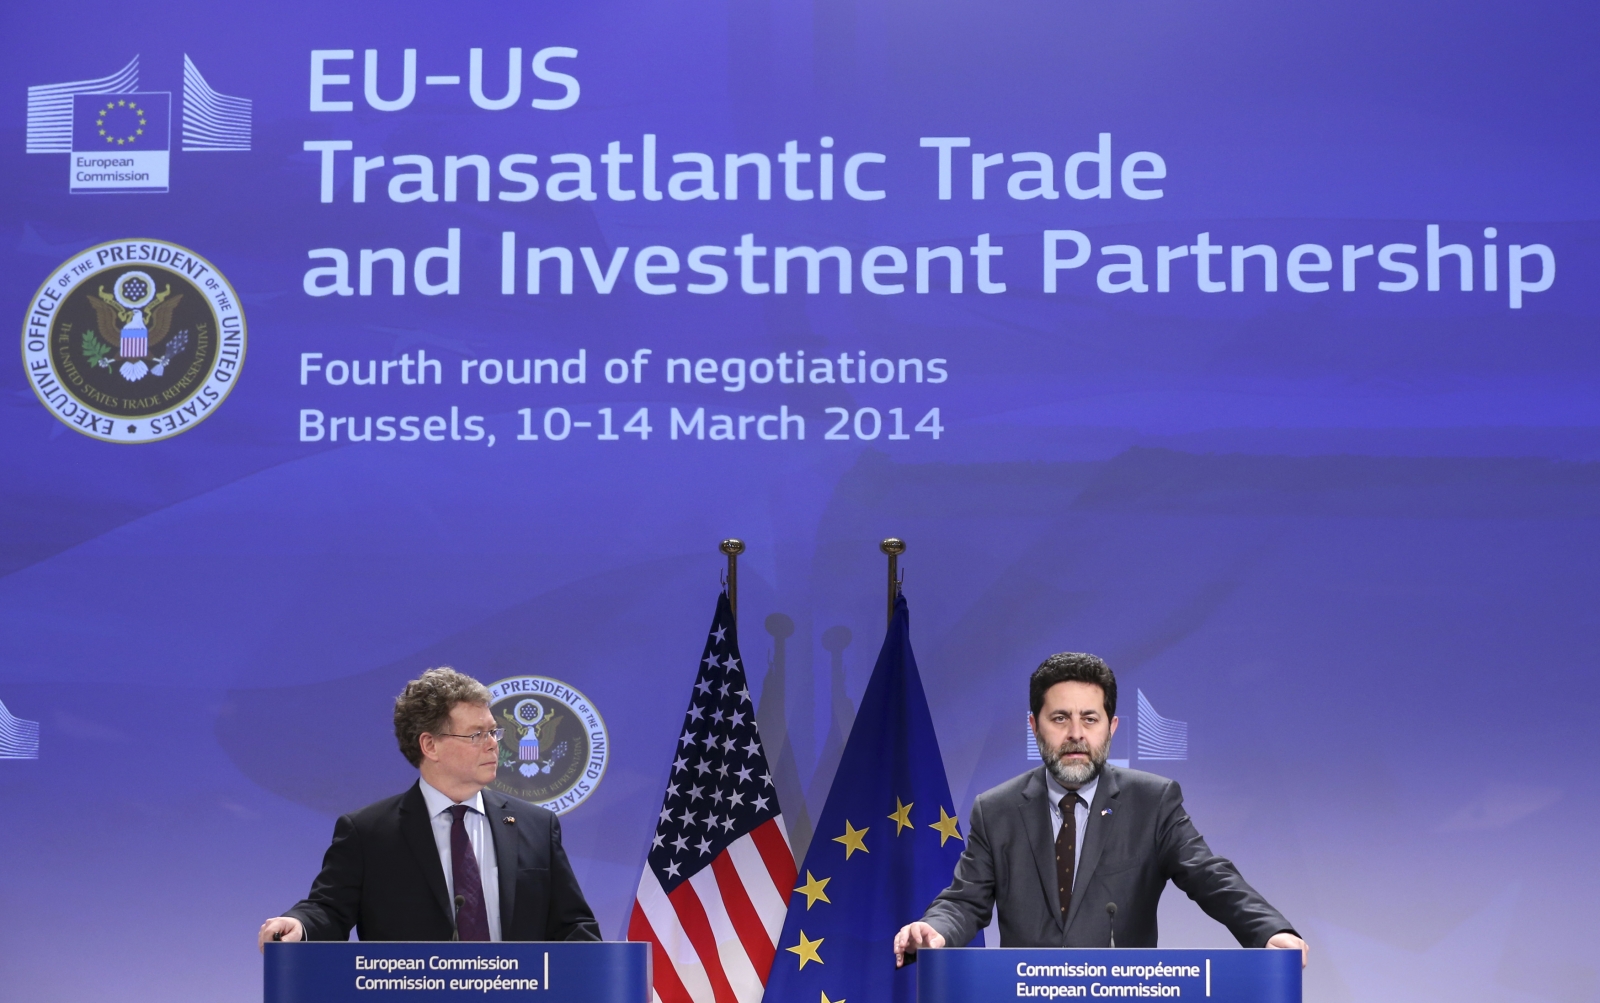 ttip-government-will-not-exclude-nhs-from-free-trade-agreement